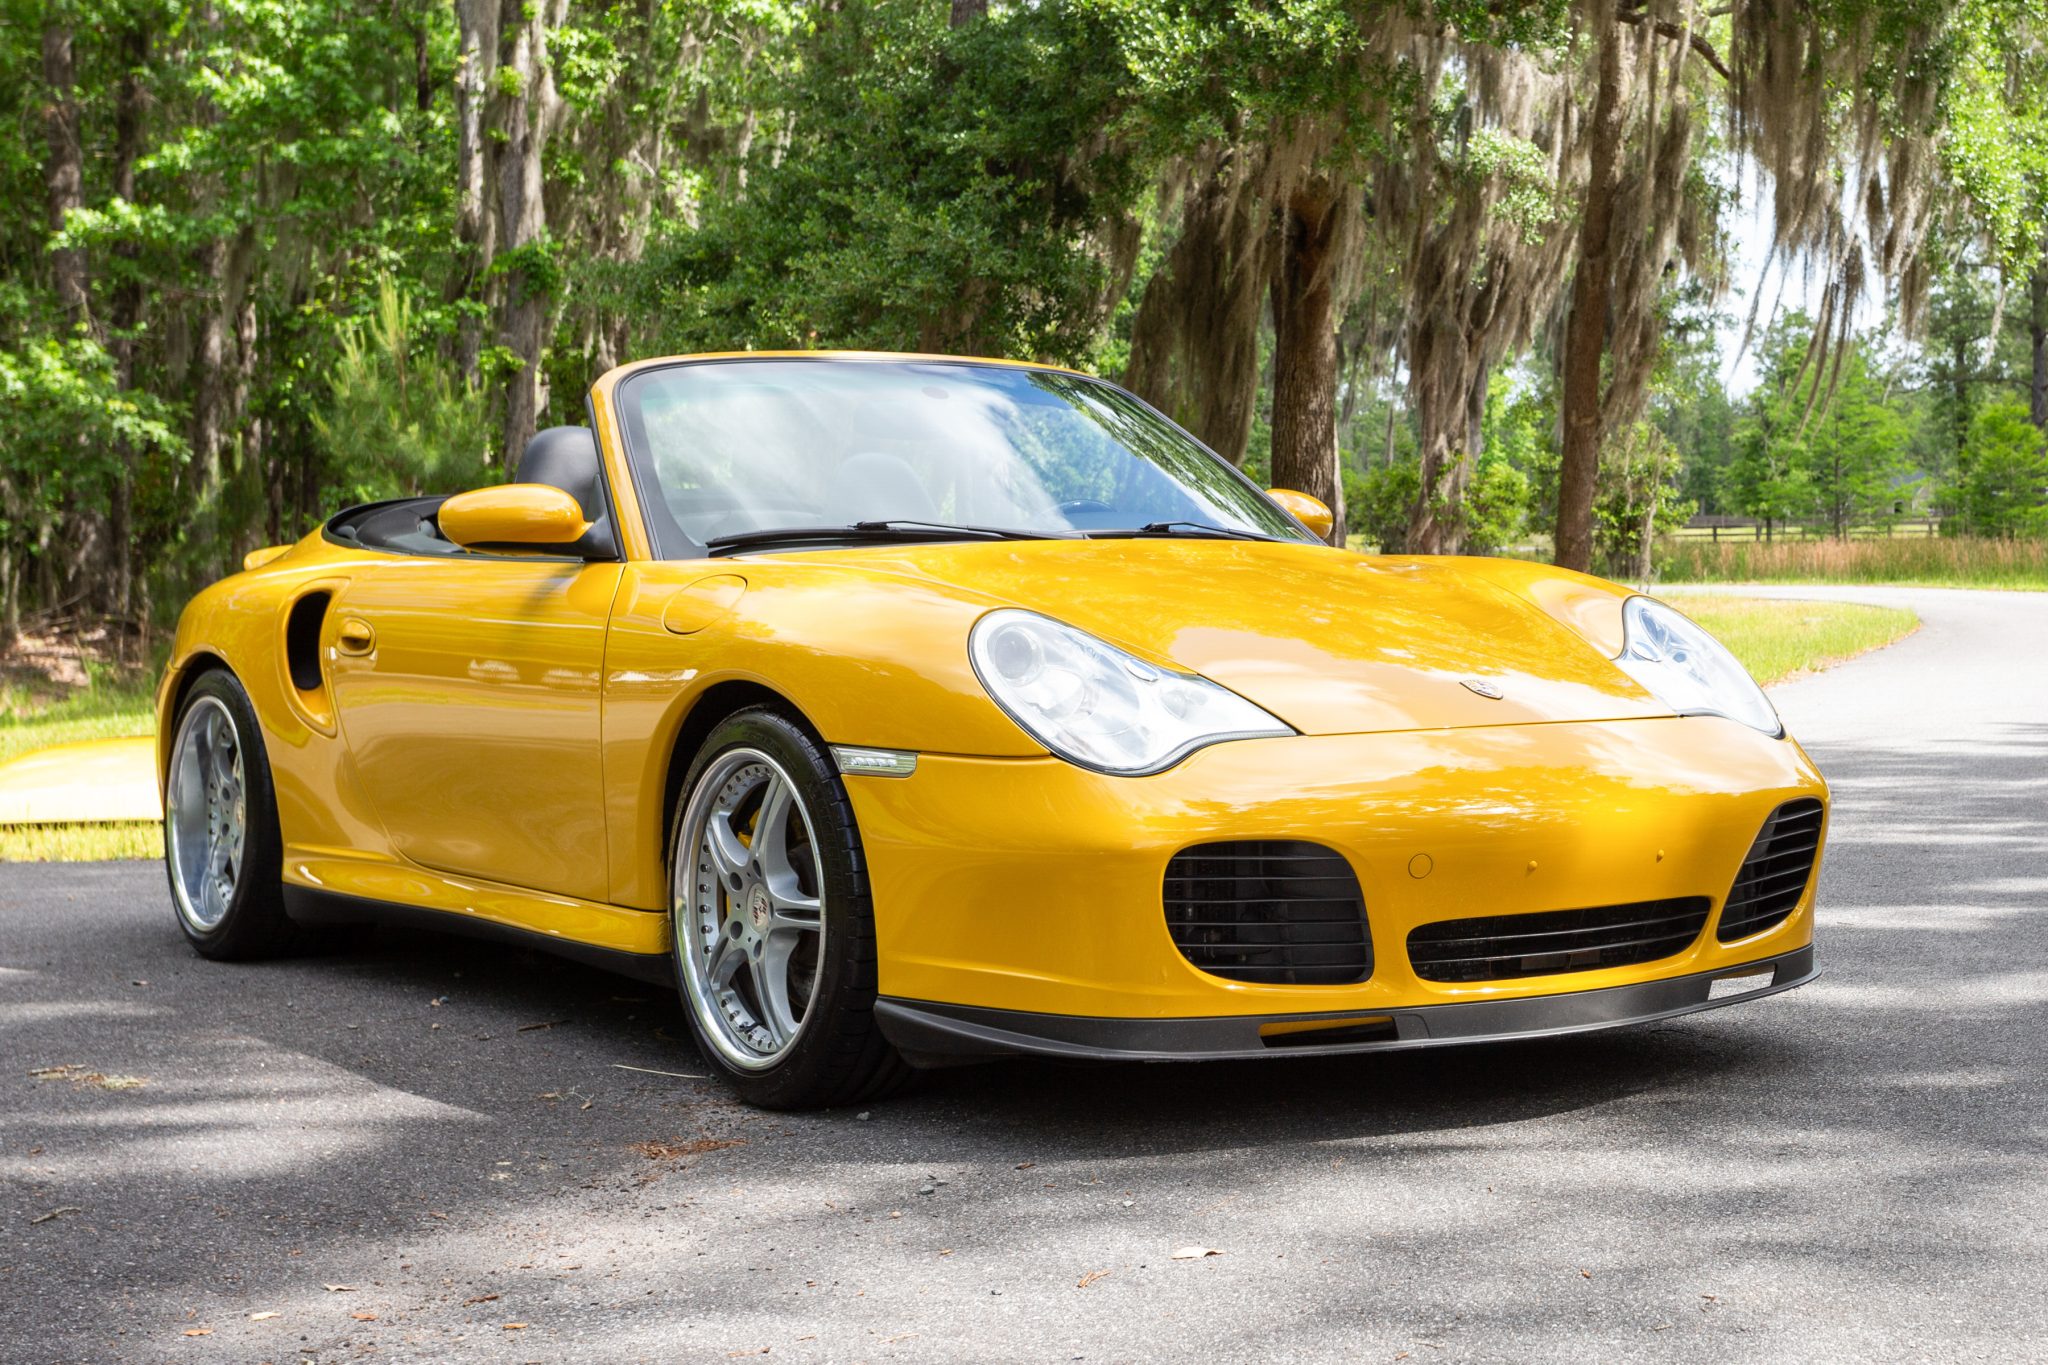 Used 2004 Porsche 911 Turbo Cabriolet X50 6-Speed Review